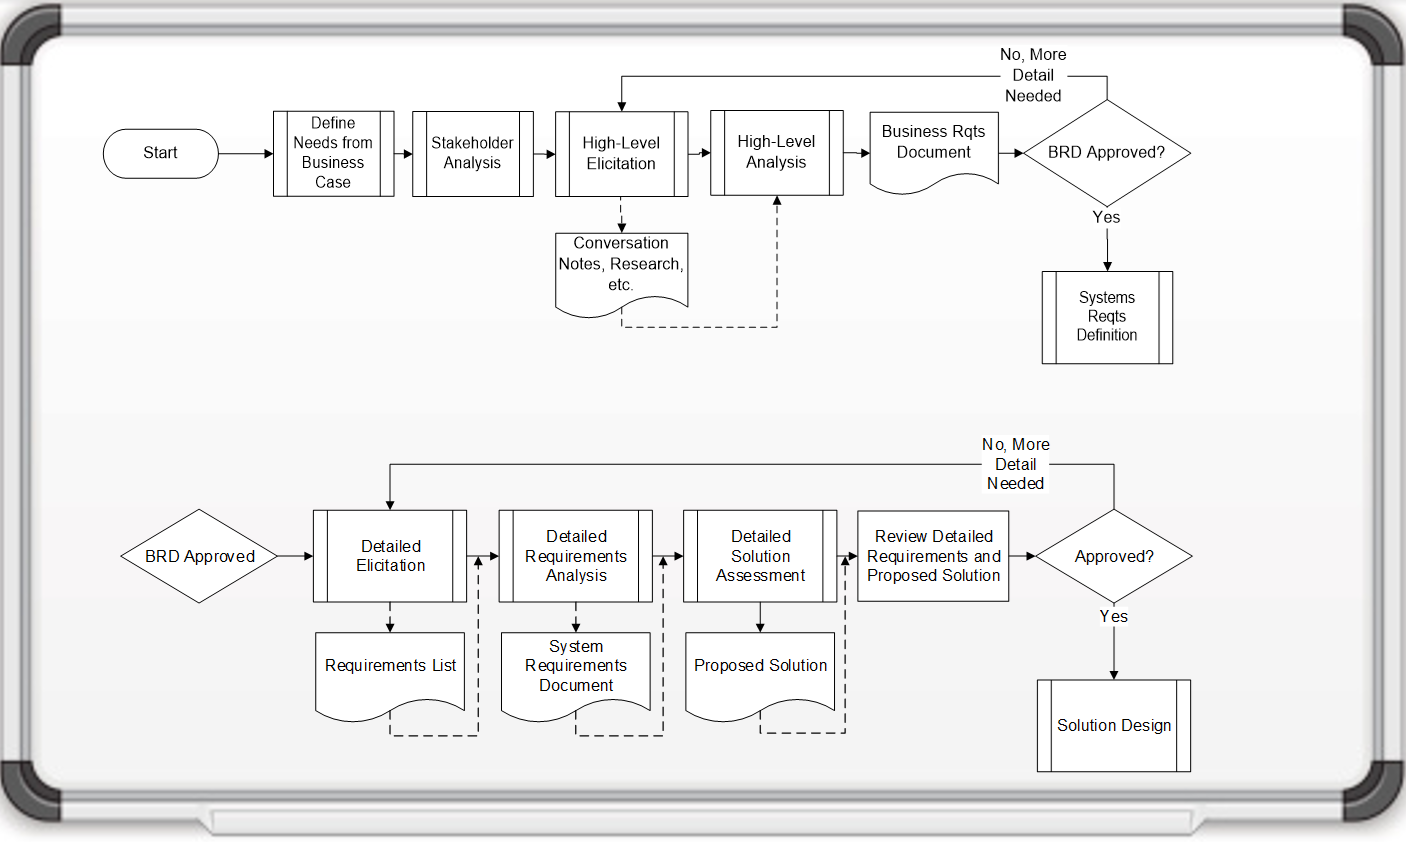 The image is an example of a requirements gathering process, representing in the format of a flowchart.